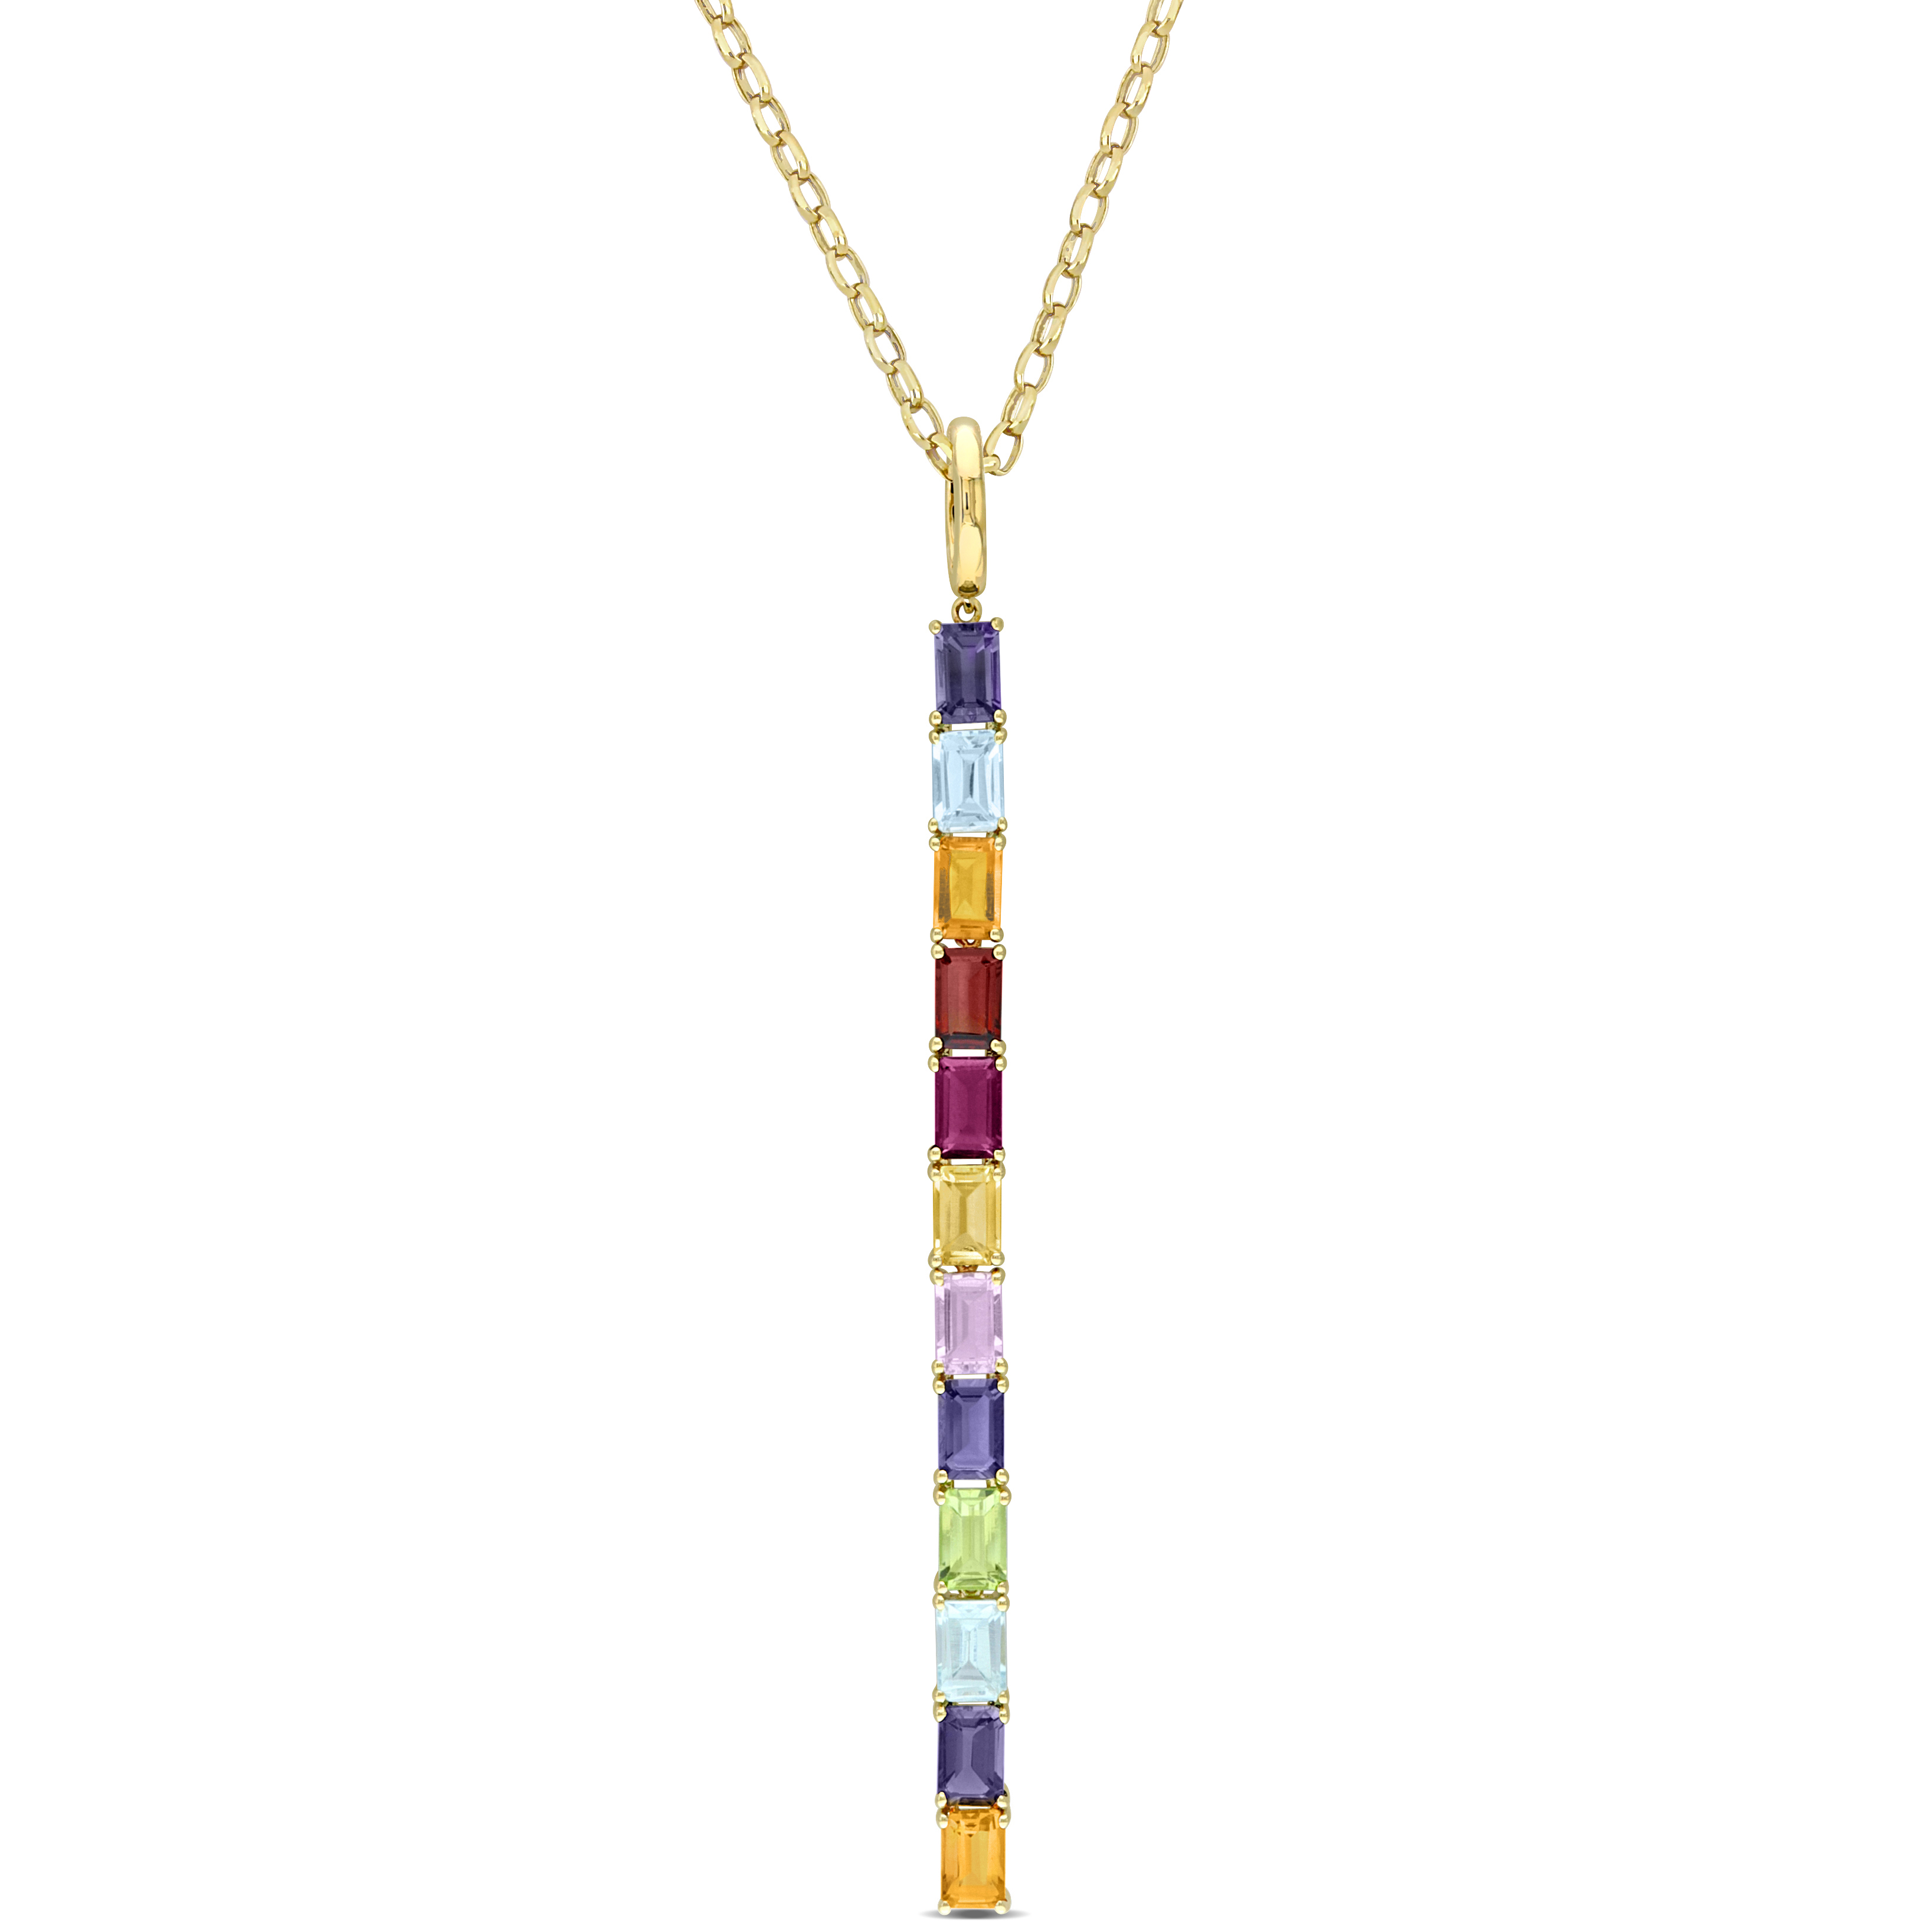 5 3/4 CT TGW Multi-Gem Octagon Cut Pendant with Oval Link Chain in 10k Yellow Gold